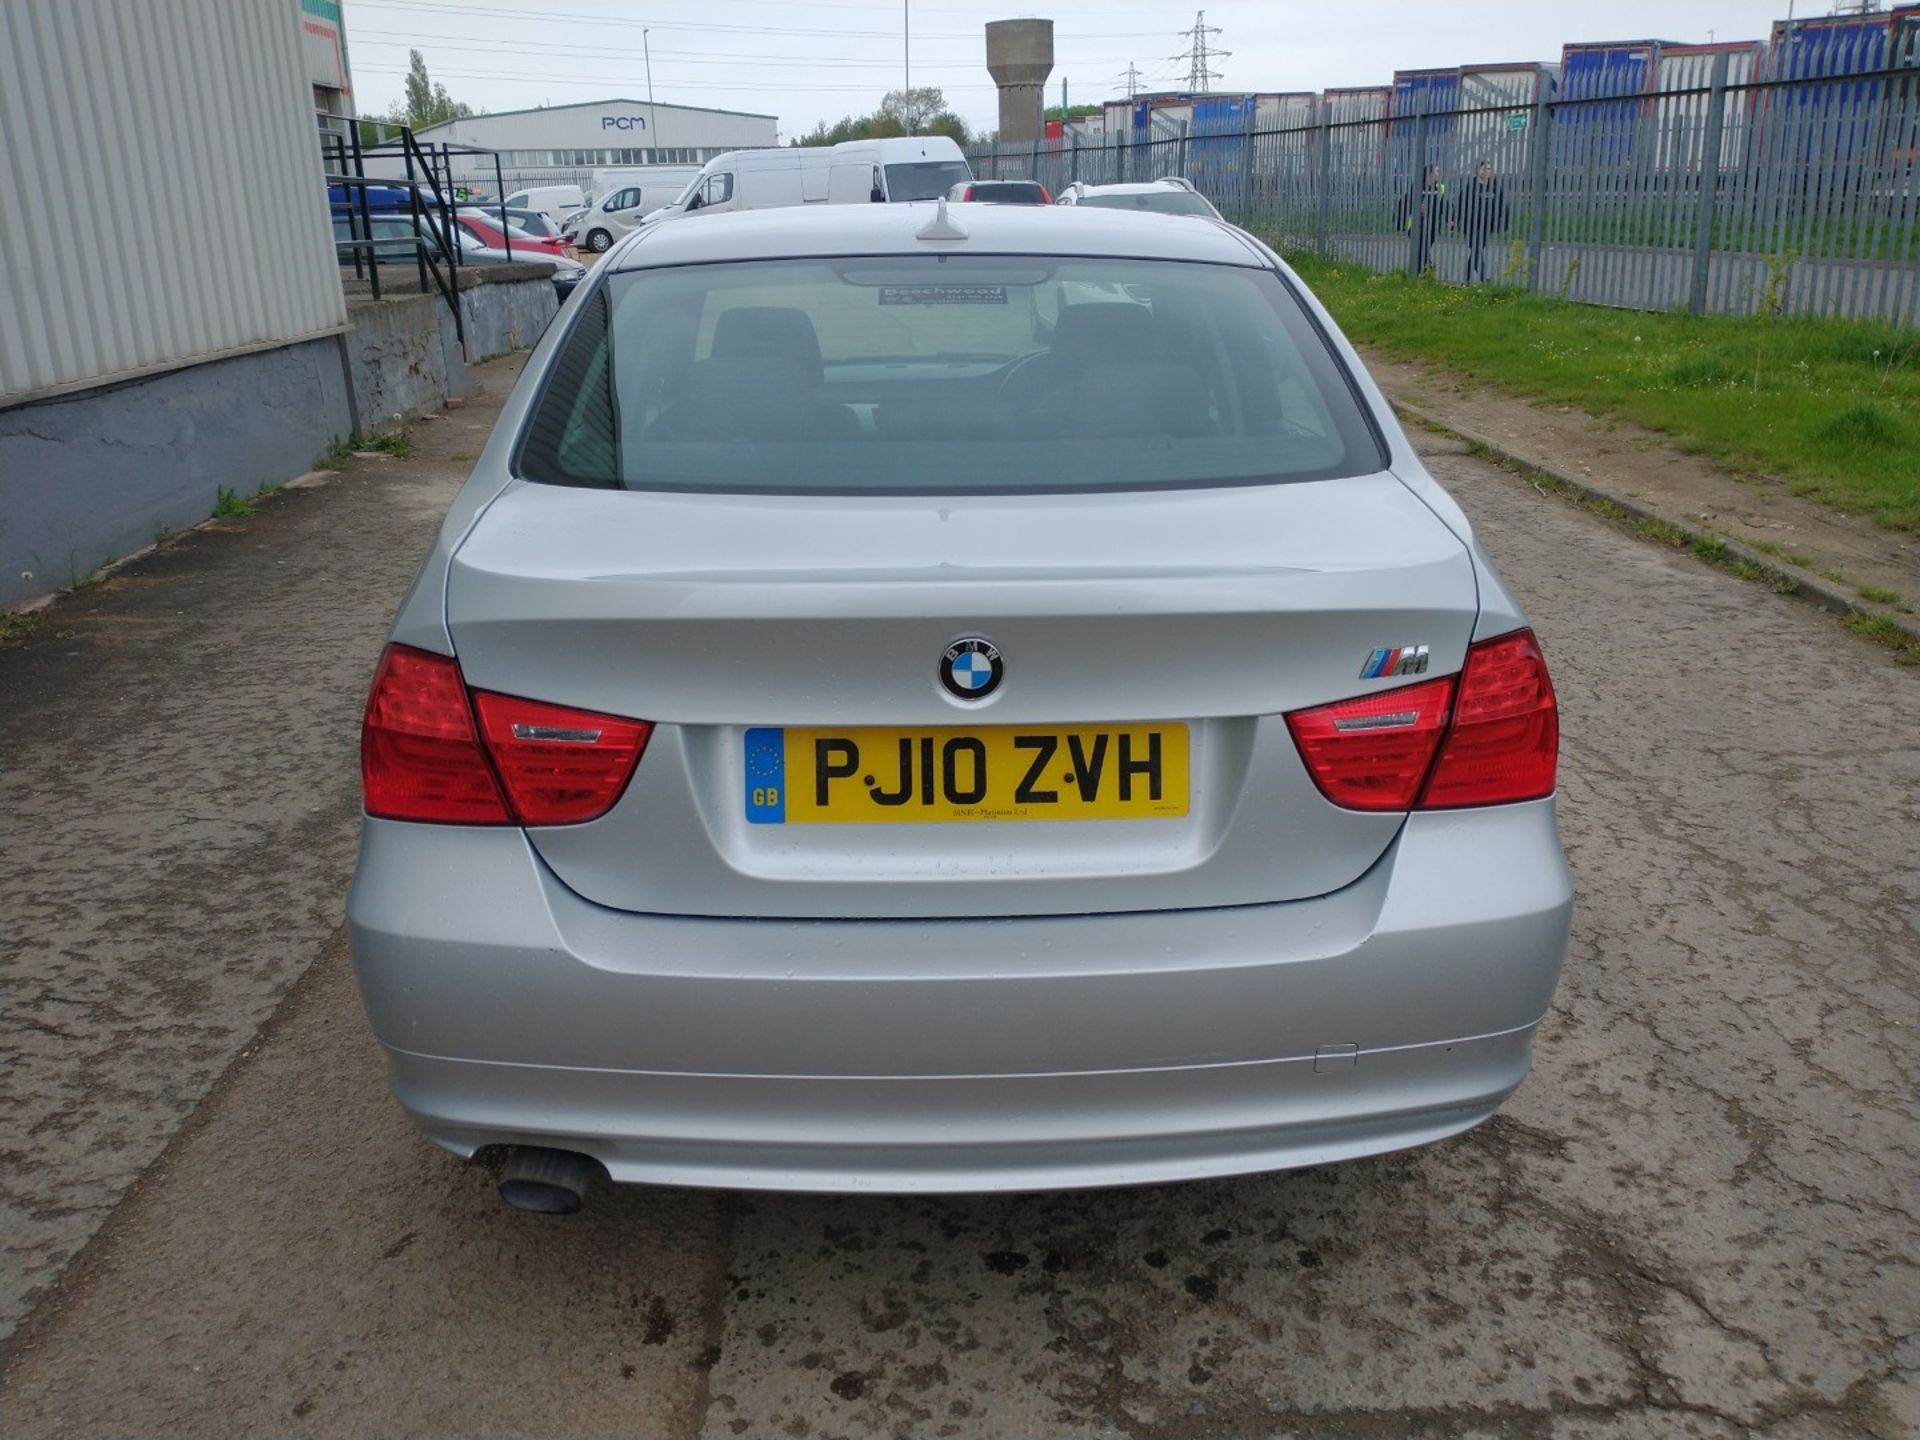 2010 BMW 316D ES 5dr Saloon 2.0 Diesel - CL505 - NO VAT ON THE HAMMER - Location: Corby - Image 13 of 18